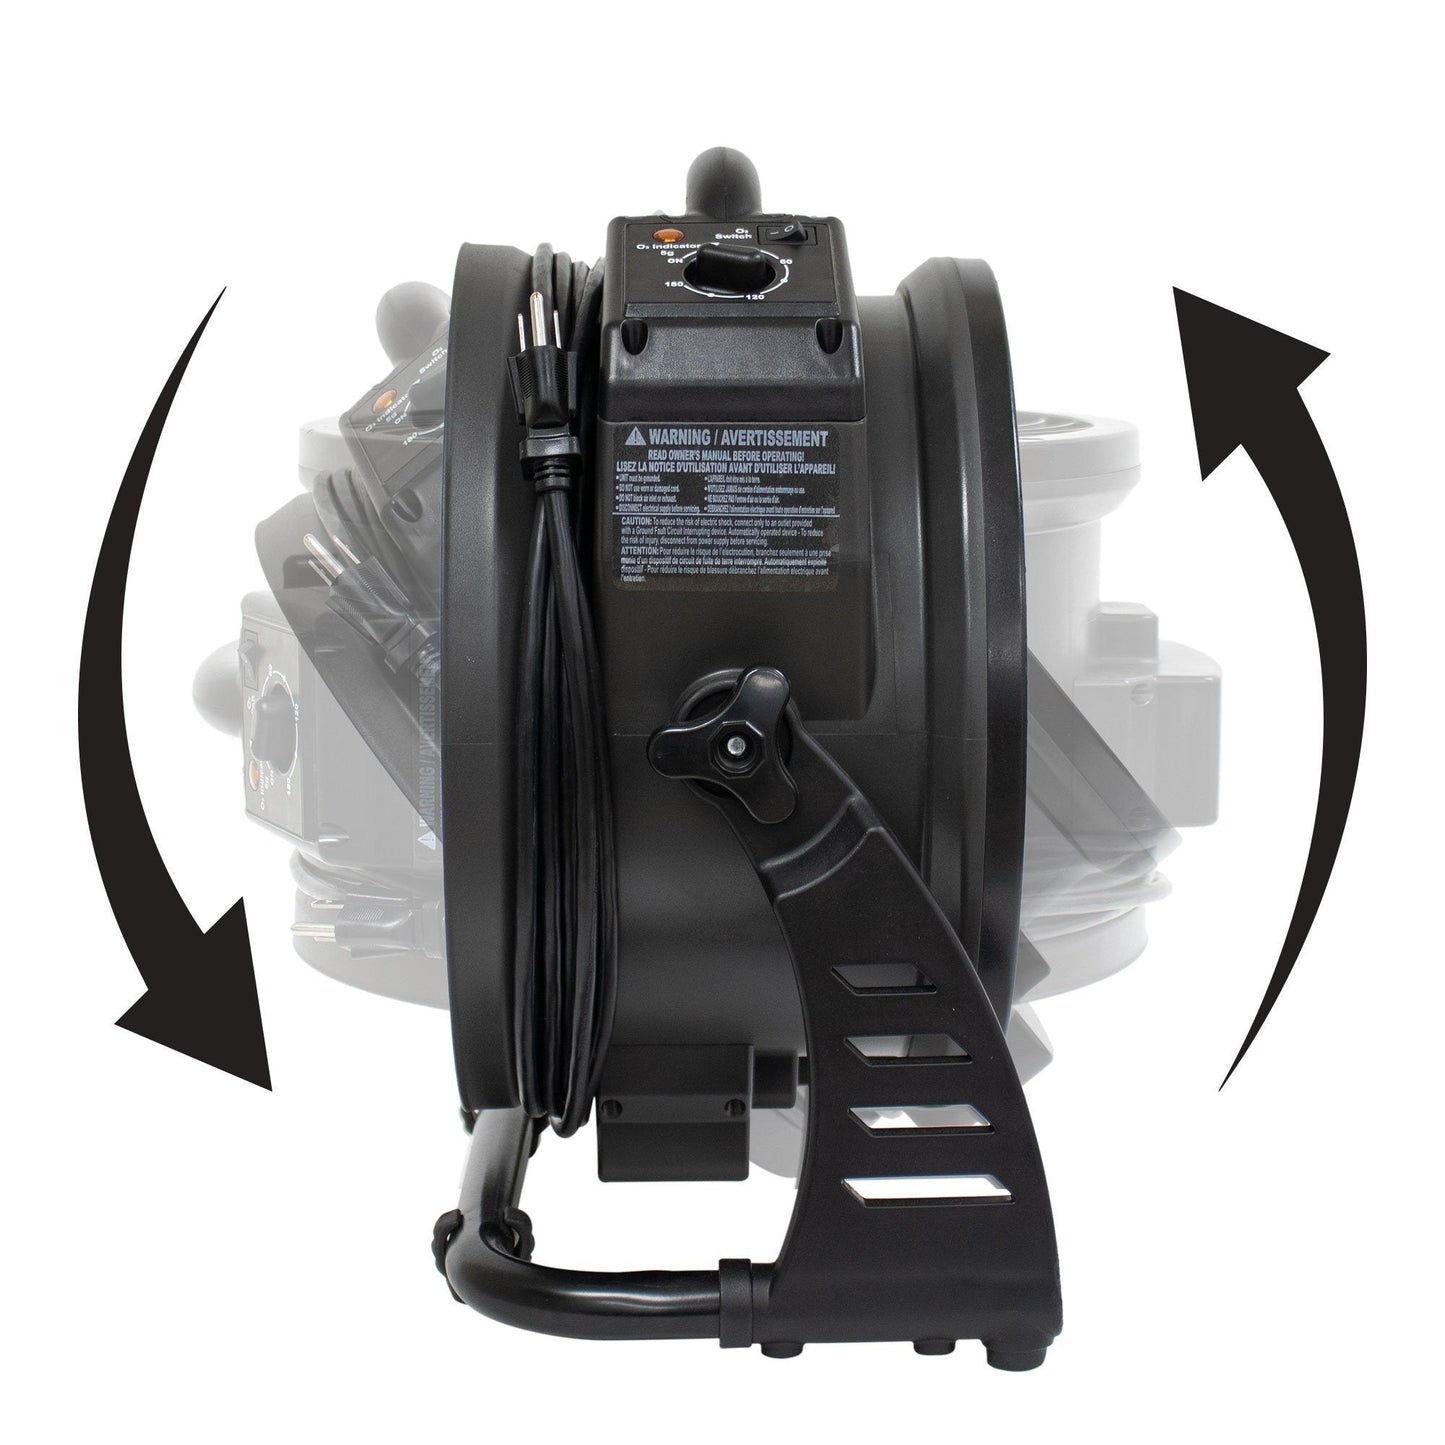 XPOWER Axial Air Mover with Ozone Generator Series-Dryers-Pet's Choice Supply